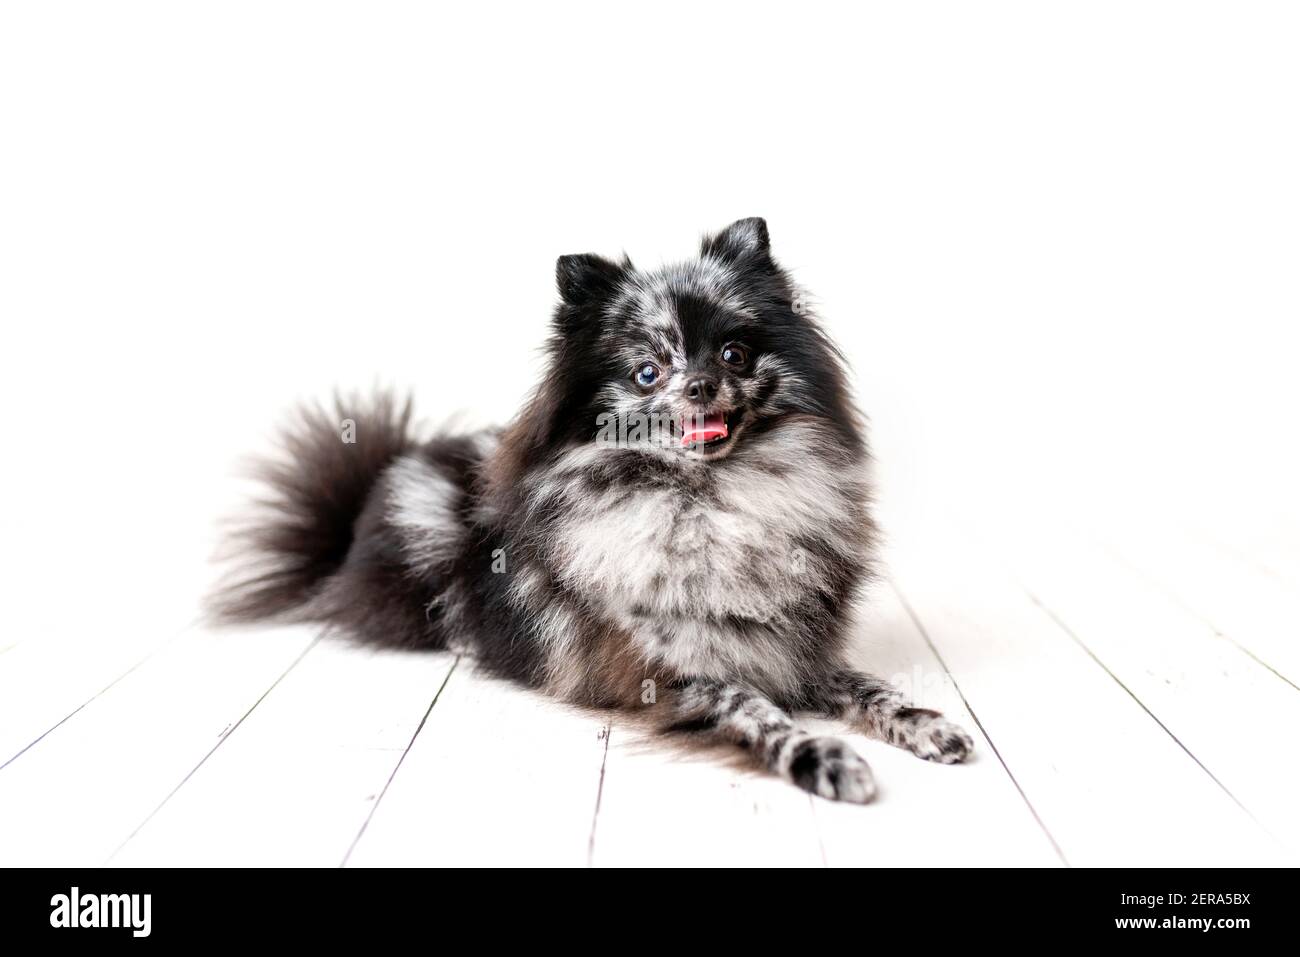 Pomeranian Merle color dog sitting, obedient little dog in a photography studio Stock Photo